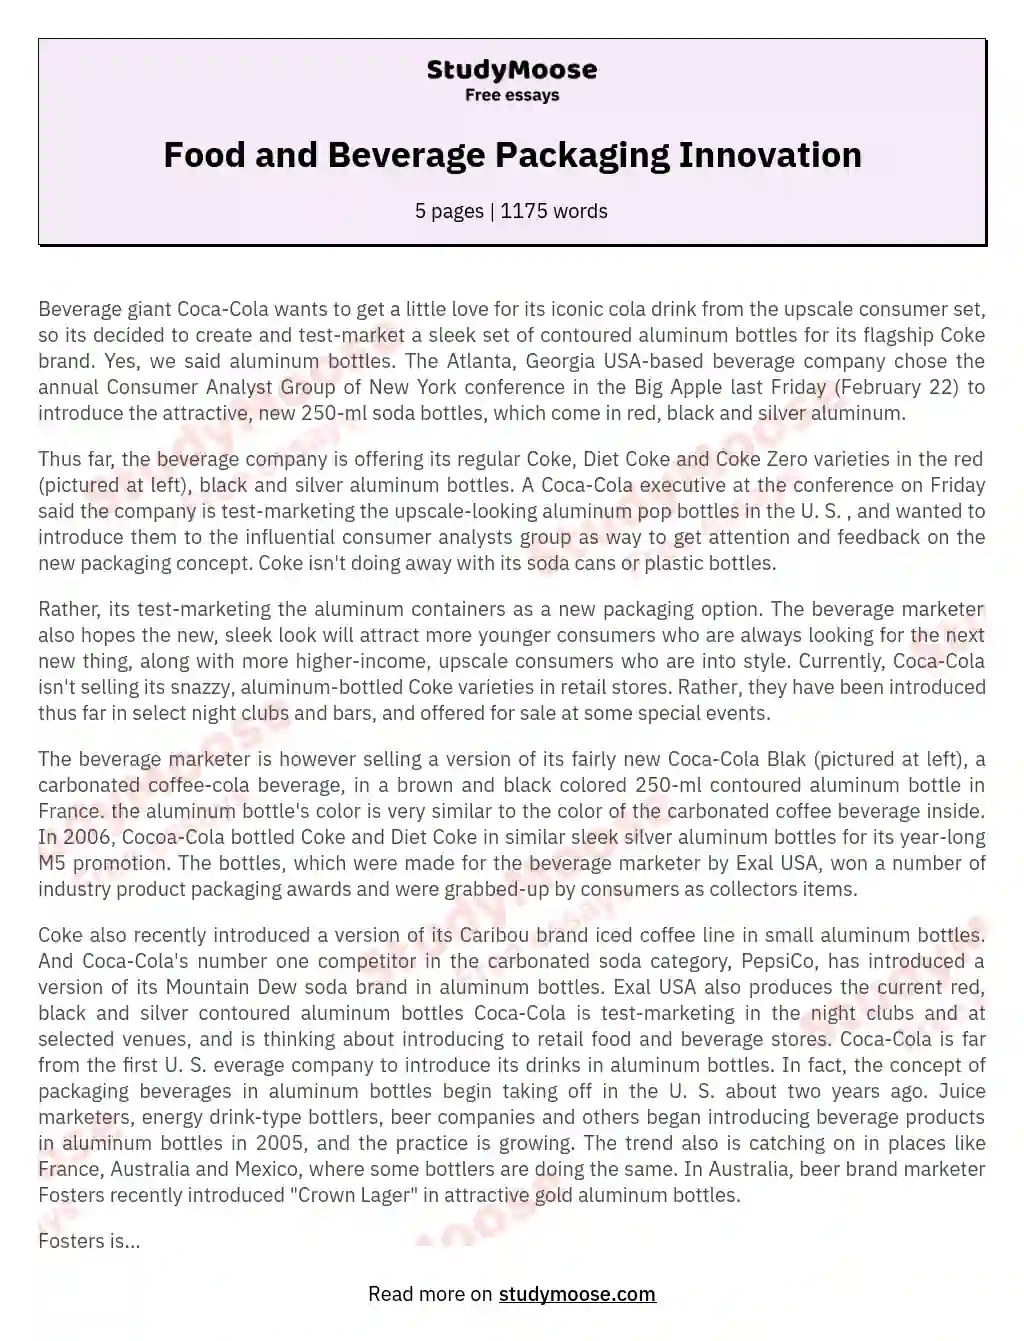 Food and Beverage Packaging Innovation essay